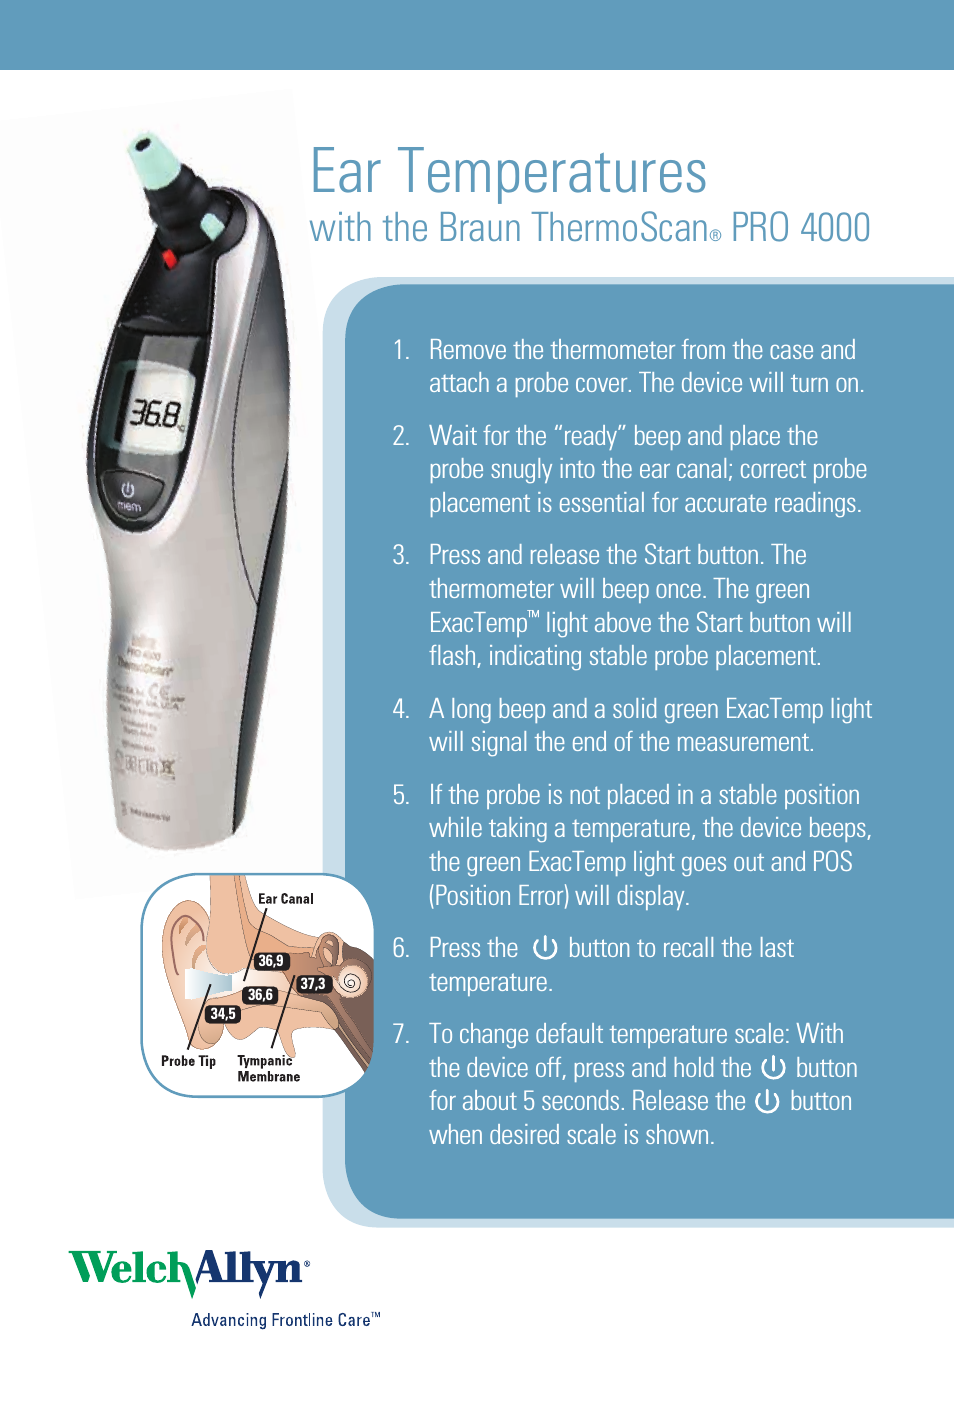 Ear Temperatures with the Braun ThermoScan PRO 4000 - Quick Reference Guide